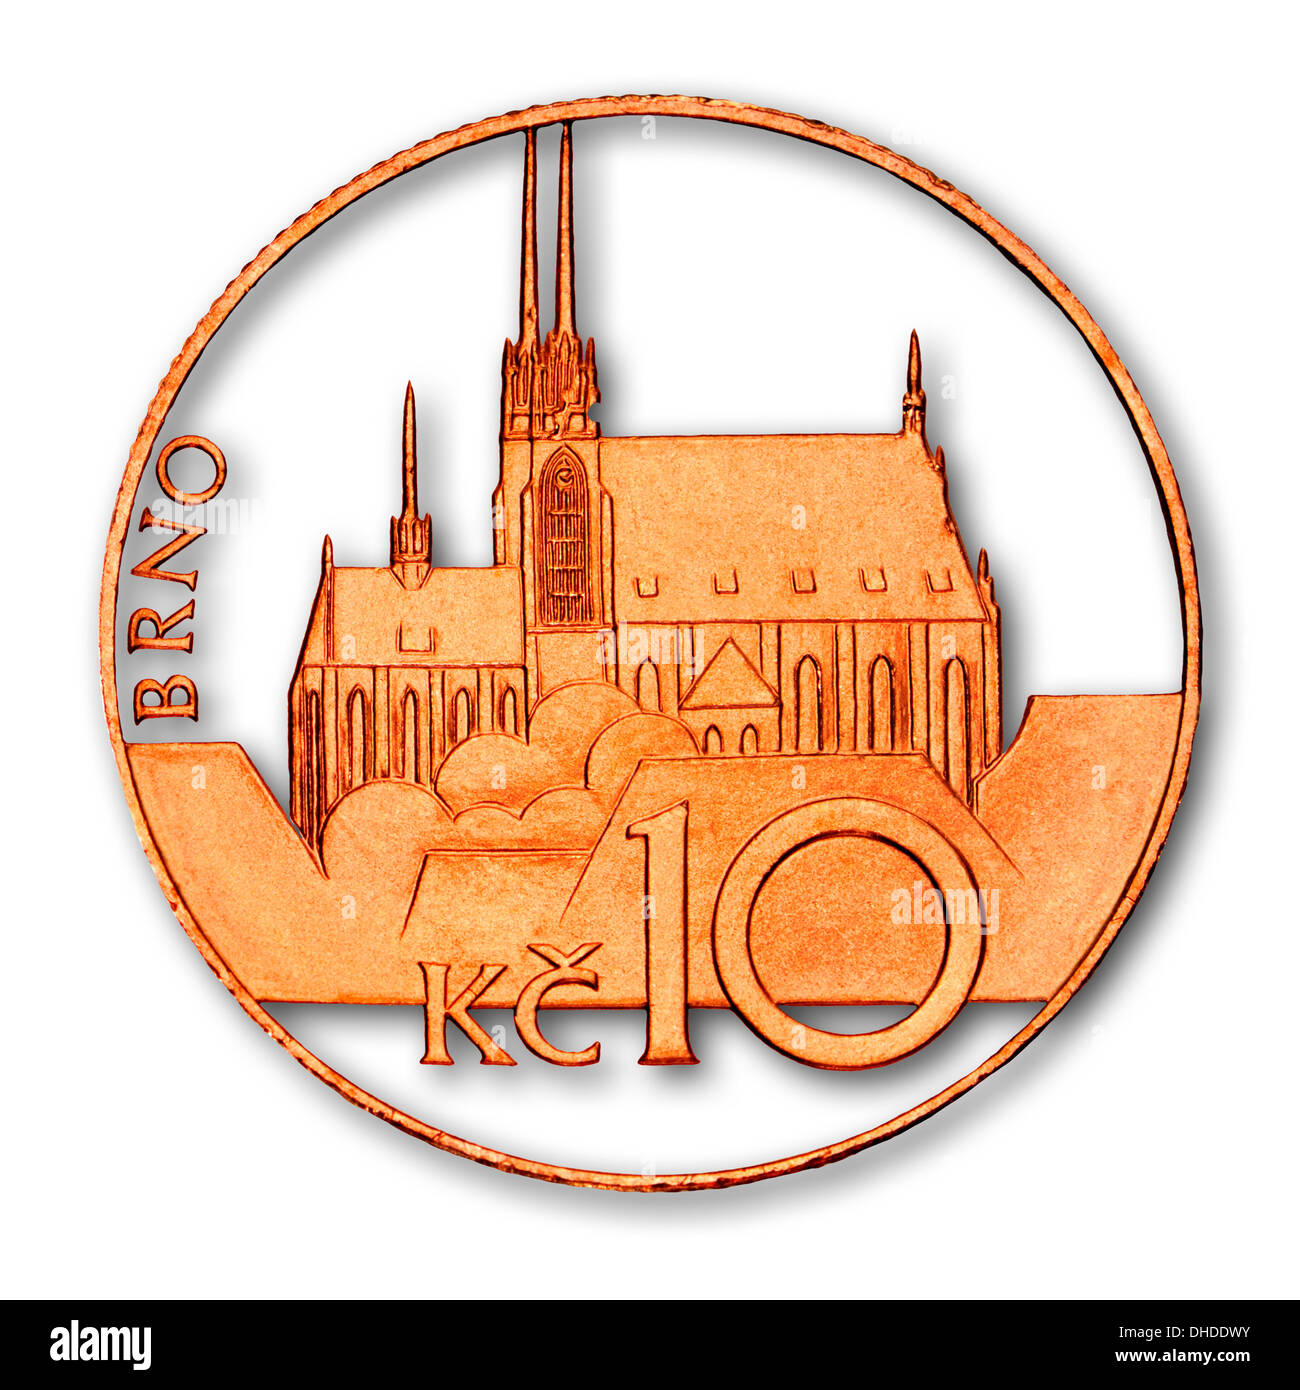 Brno Cathedral of St Peter and St Paul, from Czech Republic 10Kc coin Stock Photo